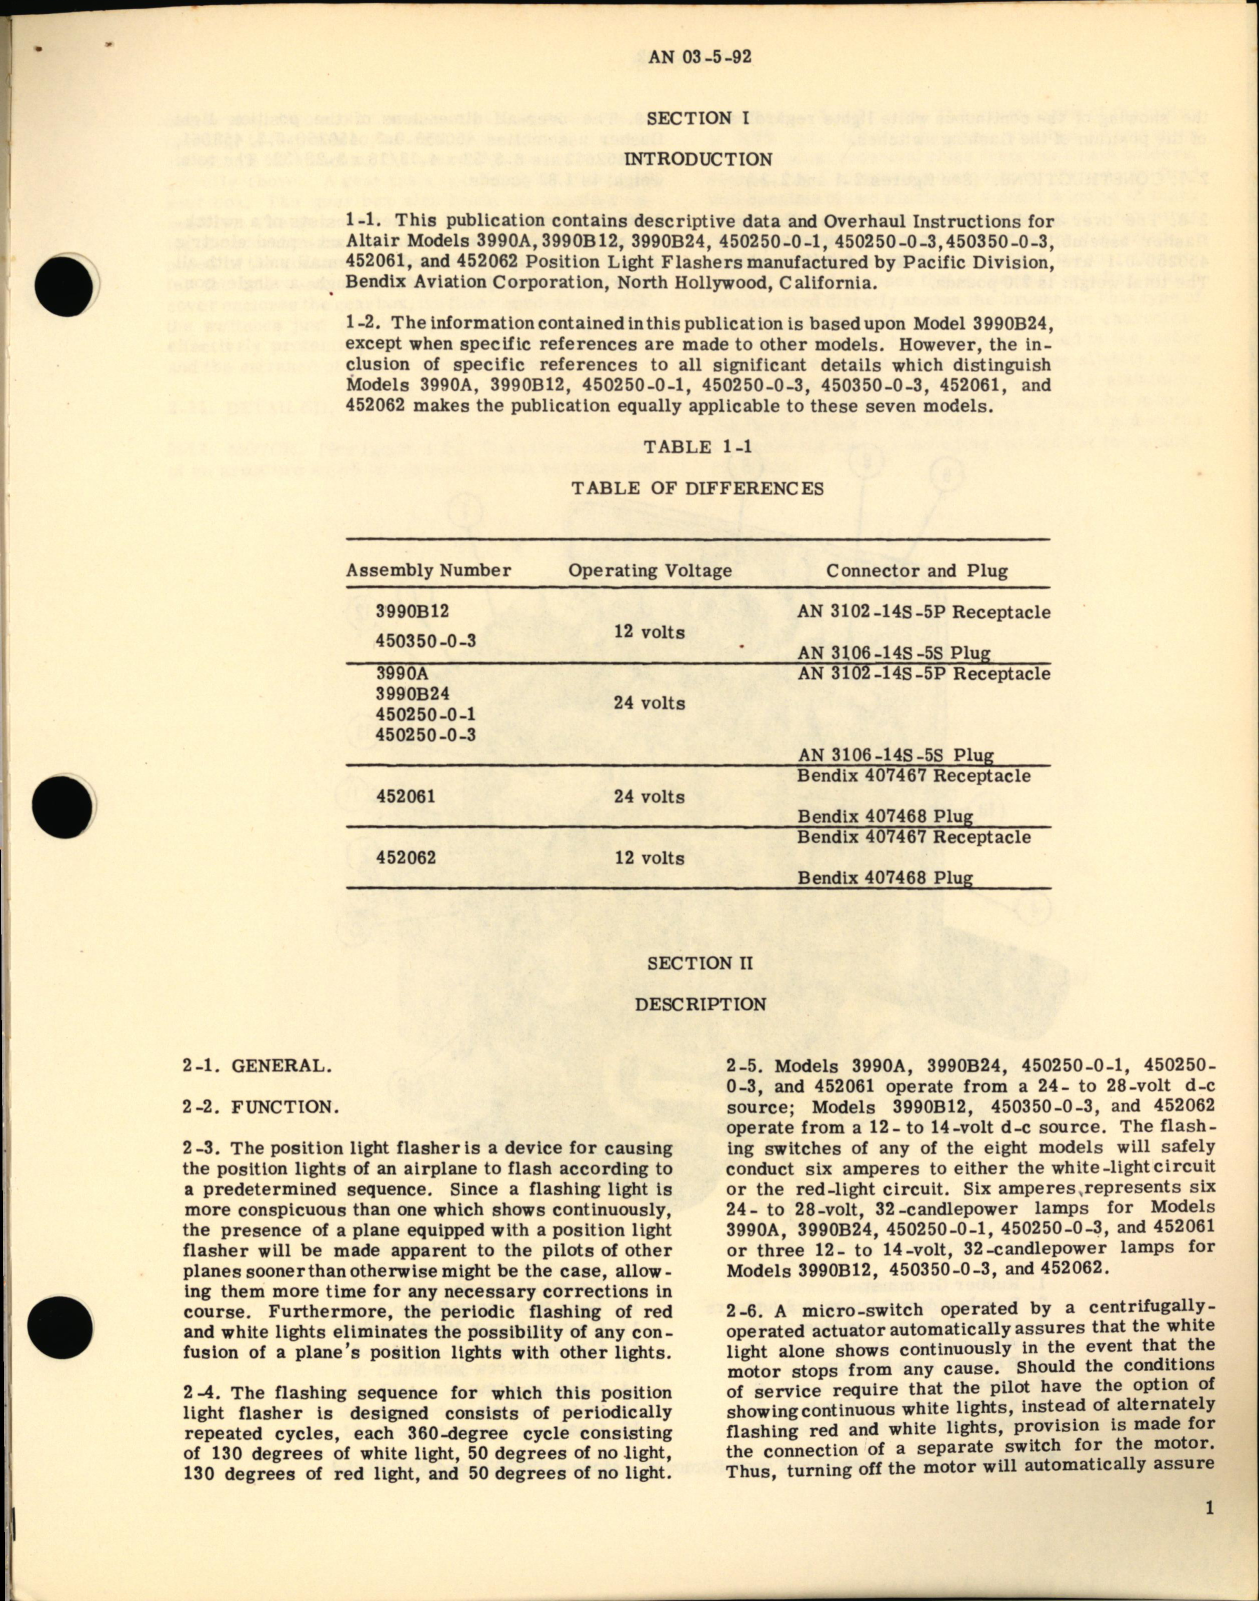 Sample page 5 from AirCorps Library document: Overhaul Instructions for Position Light Flashers